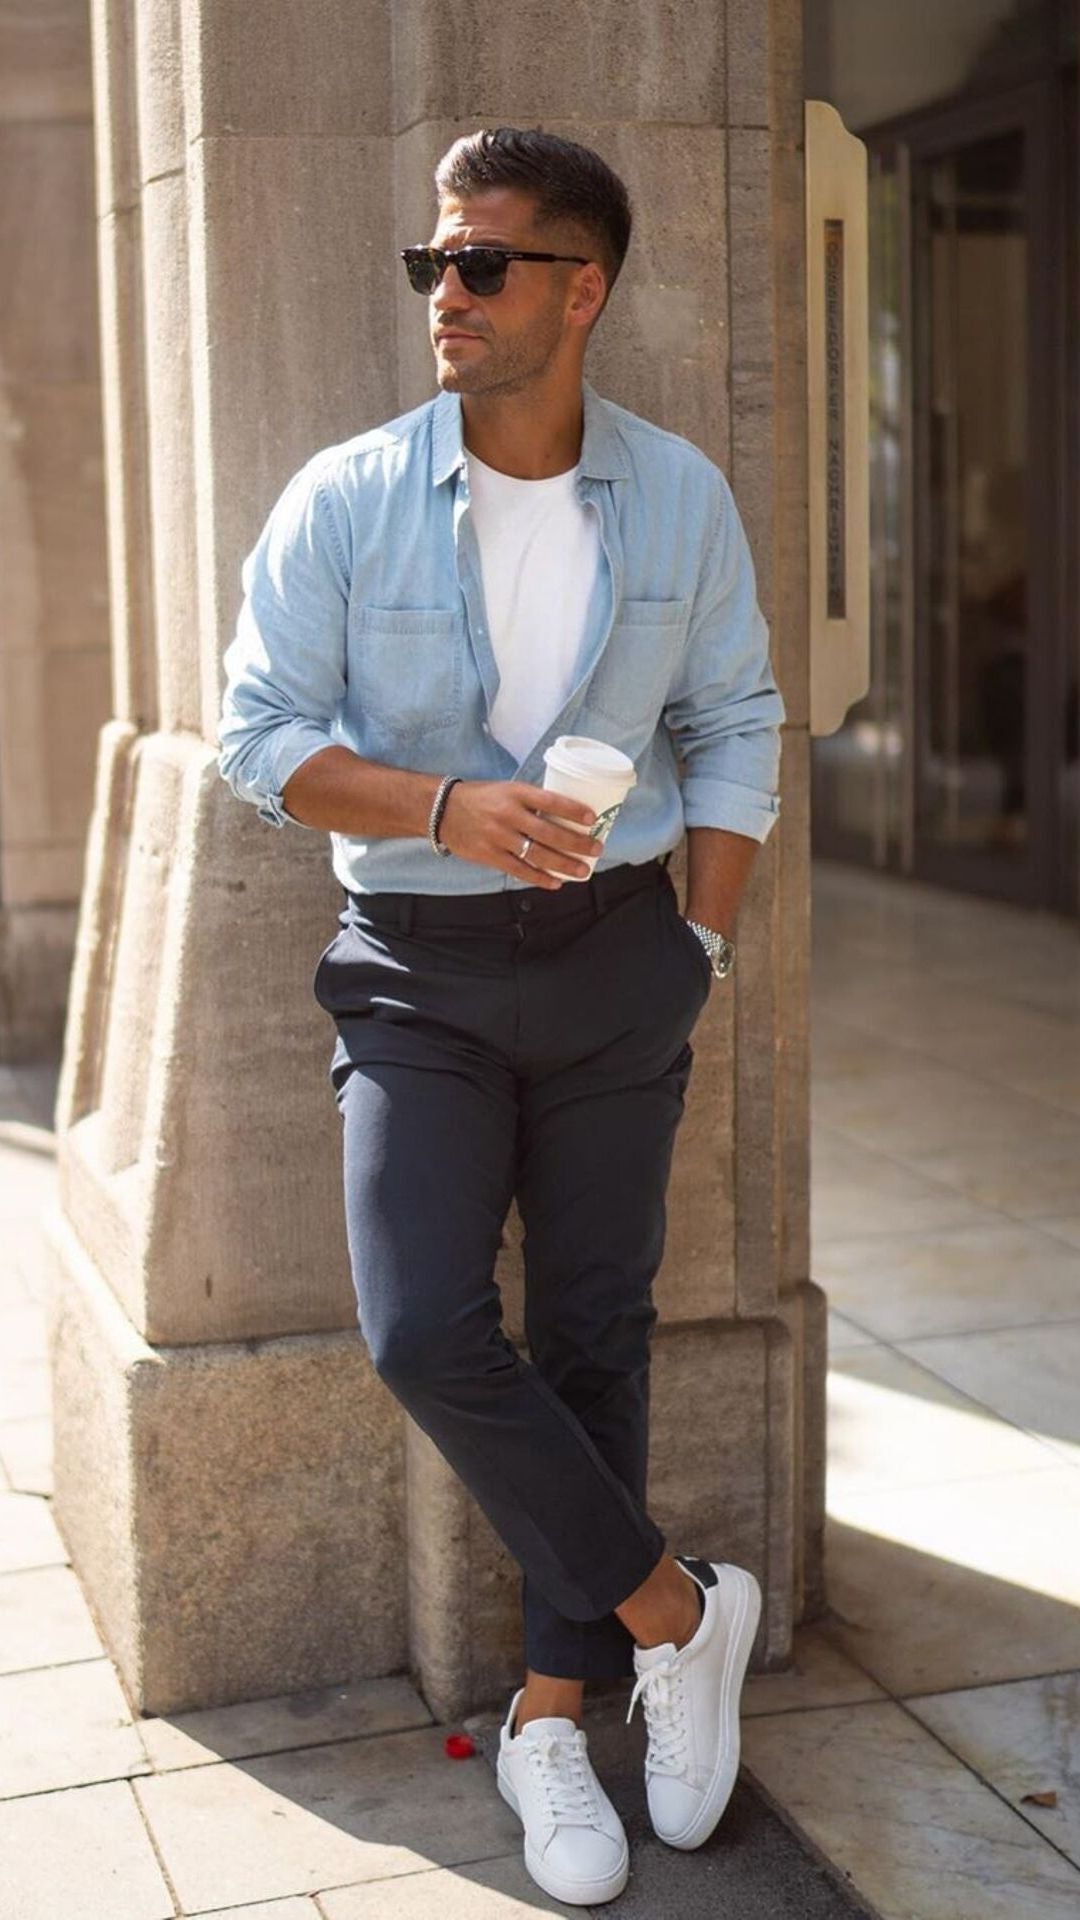 5 Casual Street Style Looks For Men #mens #fashion #street #style